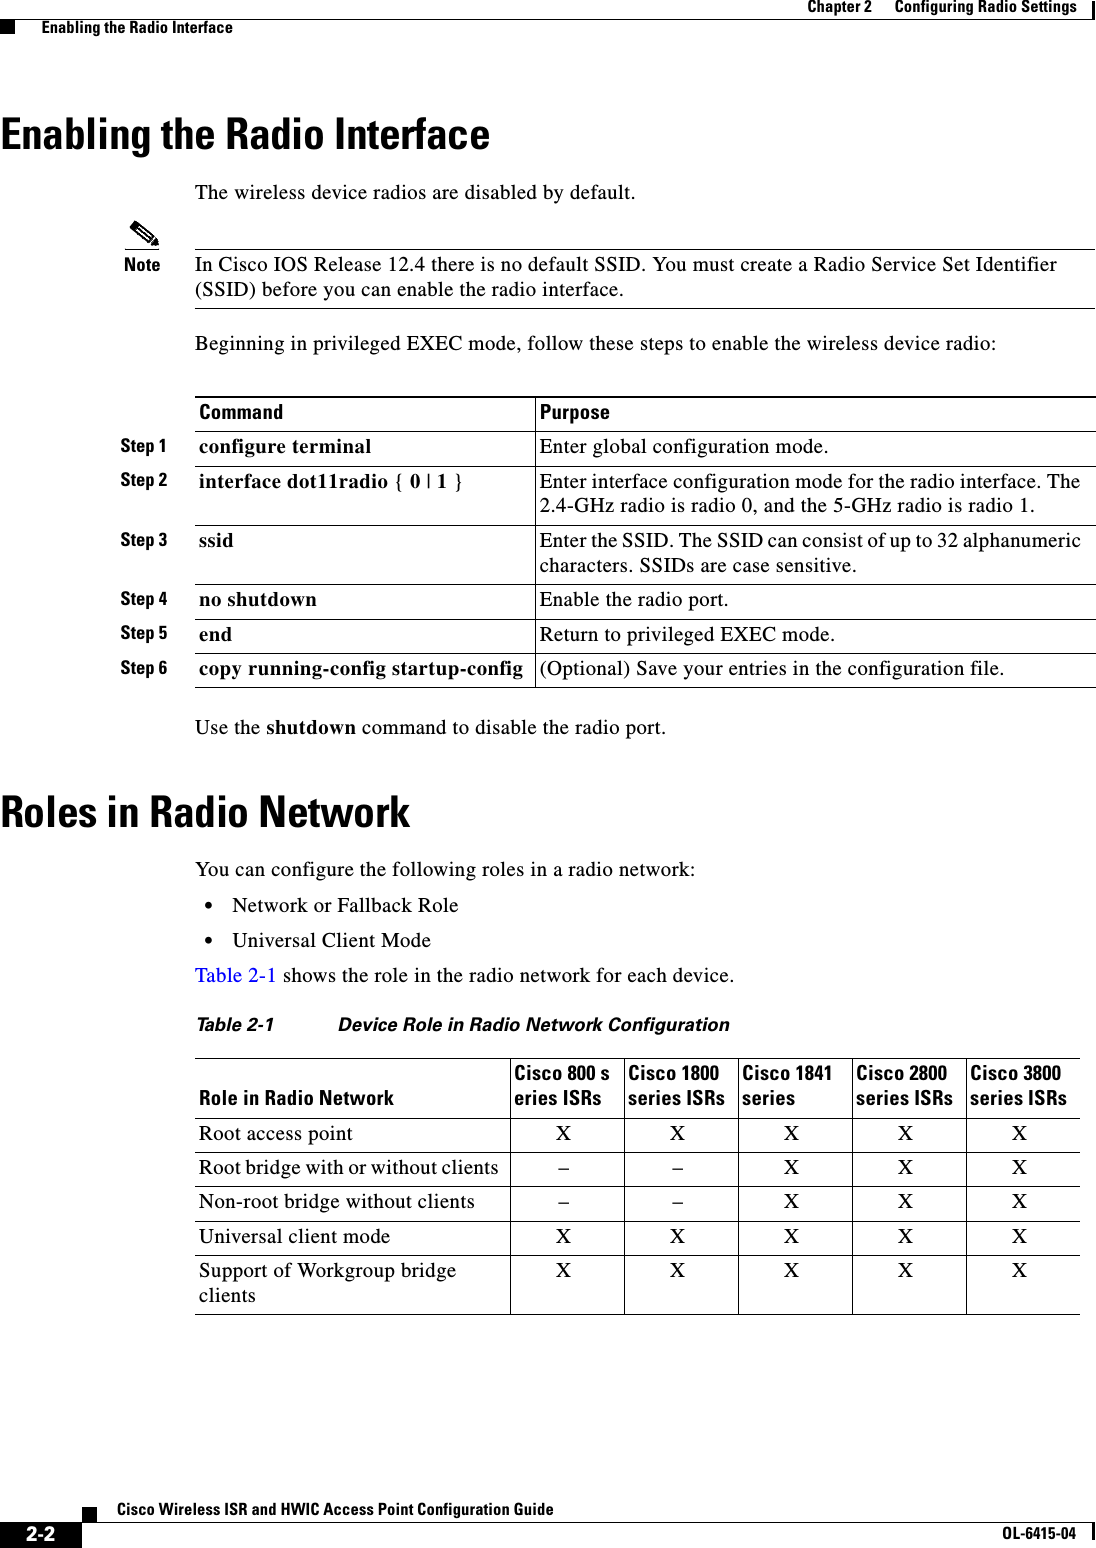  2-2Cisco Wireless ISR and HWIC Access Point Configuration GuideOL-6415-04Chapter 2      Configuring Radio Settings  Enabling the Radio InterfaceEnabling the Radio InterfaceThe wireless device radios are disabled by default. Note In Cisco IOS Release 12.4 there is no default SSID. You must create a Radio Service Set Identifier (SSID) before you can enable the radio interface. Beginning in privileged EXEC mode, follow these steps to enable the wireless device radio:Use the shutdown command to disable the radio port. Roles in Radio NetworkYou  c an  c on fig ur e  t h e  fo ll ow in g   ro l e s   i n  a  r a di o  ne two rk :  • Network or Fallback Role  • Universal Client ModeTable 2-1 shows the role in the radio network for each device.Command PurposeStep 1 configure terminal Enter global configuration mode.Step 2 interface dot11radio { 0 | 1 }Enter interface configuration mode for the radio interface. The 2.4-GHz radio is radio 0, and the 5-GHz radio is radio 1.Step 3 ssid Enter the SSID. The SSID can consist of up to 32 alphanumeric characters. SSIDs are case sensitive.Step 4 no shutdown Enable the radio port.Step 5 end Return to privileged EXEC mode.Step 6 copy running-config startup-config (Optional) Save your entries in the configuration file.Ta b l e  2-1 Device Role in Radio Network ConfigurationRole in Radio NetworkCisco 800 series ISRsCisco 1800 series ISRsCisco 1841 seriesCisco 2800 series ISRsCisco 3800 series ISRsRoot access point XXXXXRoot bridge with or without clients – – X X XNon-root bridge without clients – – X X XUniversal client mode XXXXXSupport of Workgroup bridge clientsXXXXX